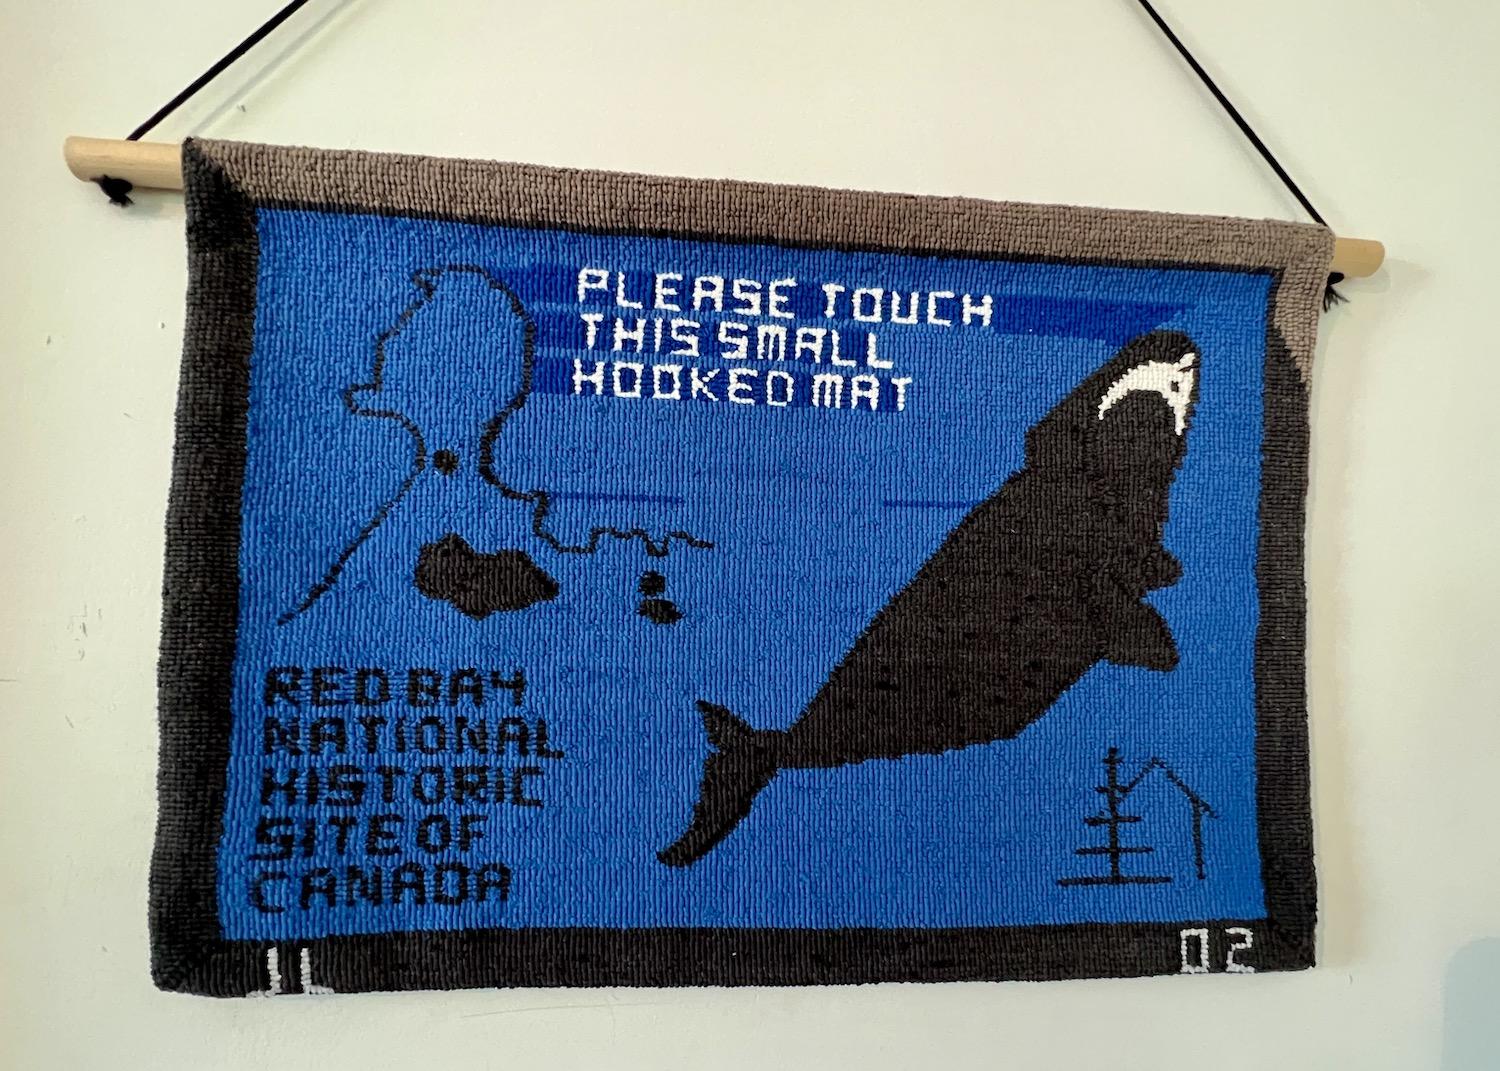 A hooked mat that shows a right whale is on display at the Red Bay National Historic Site.